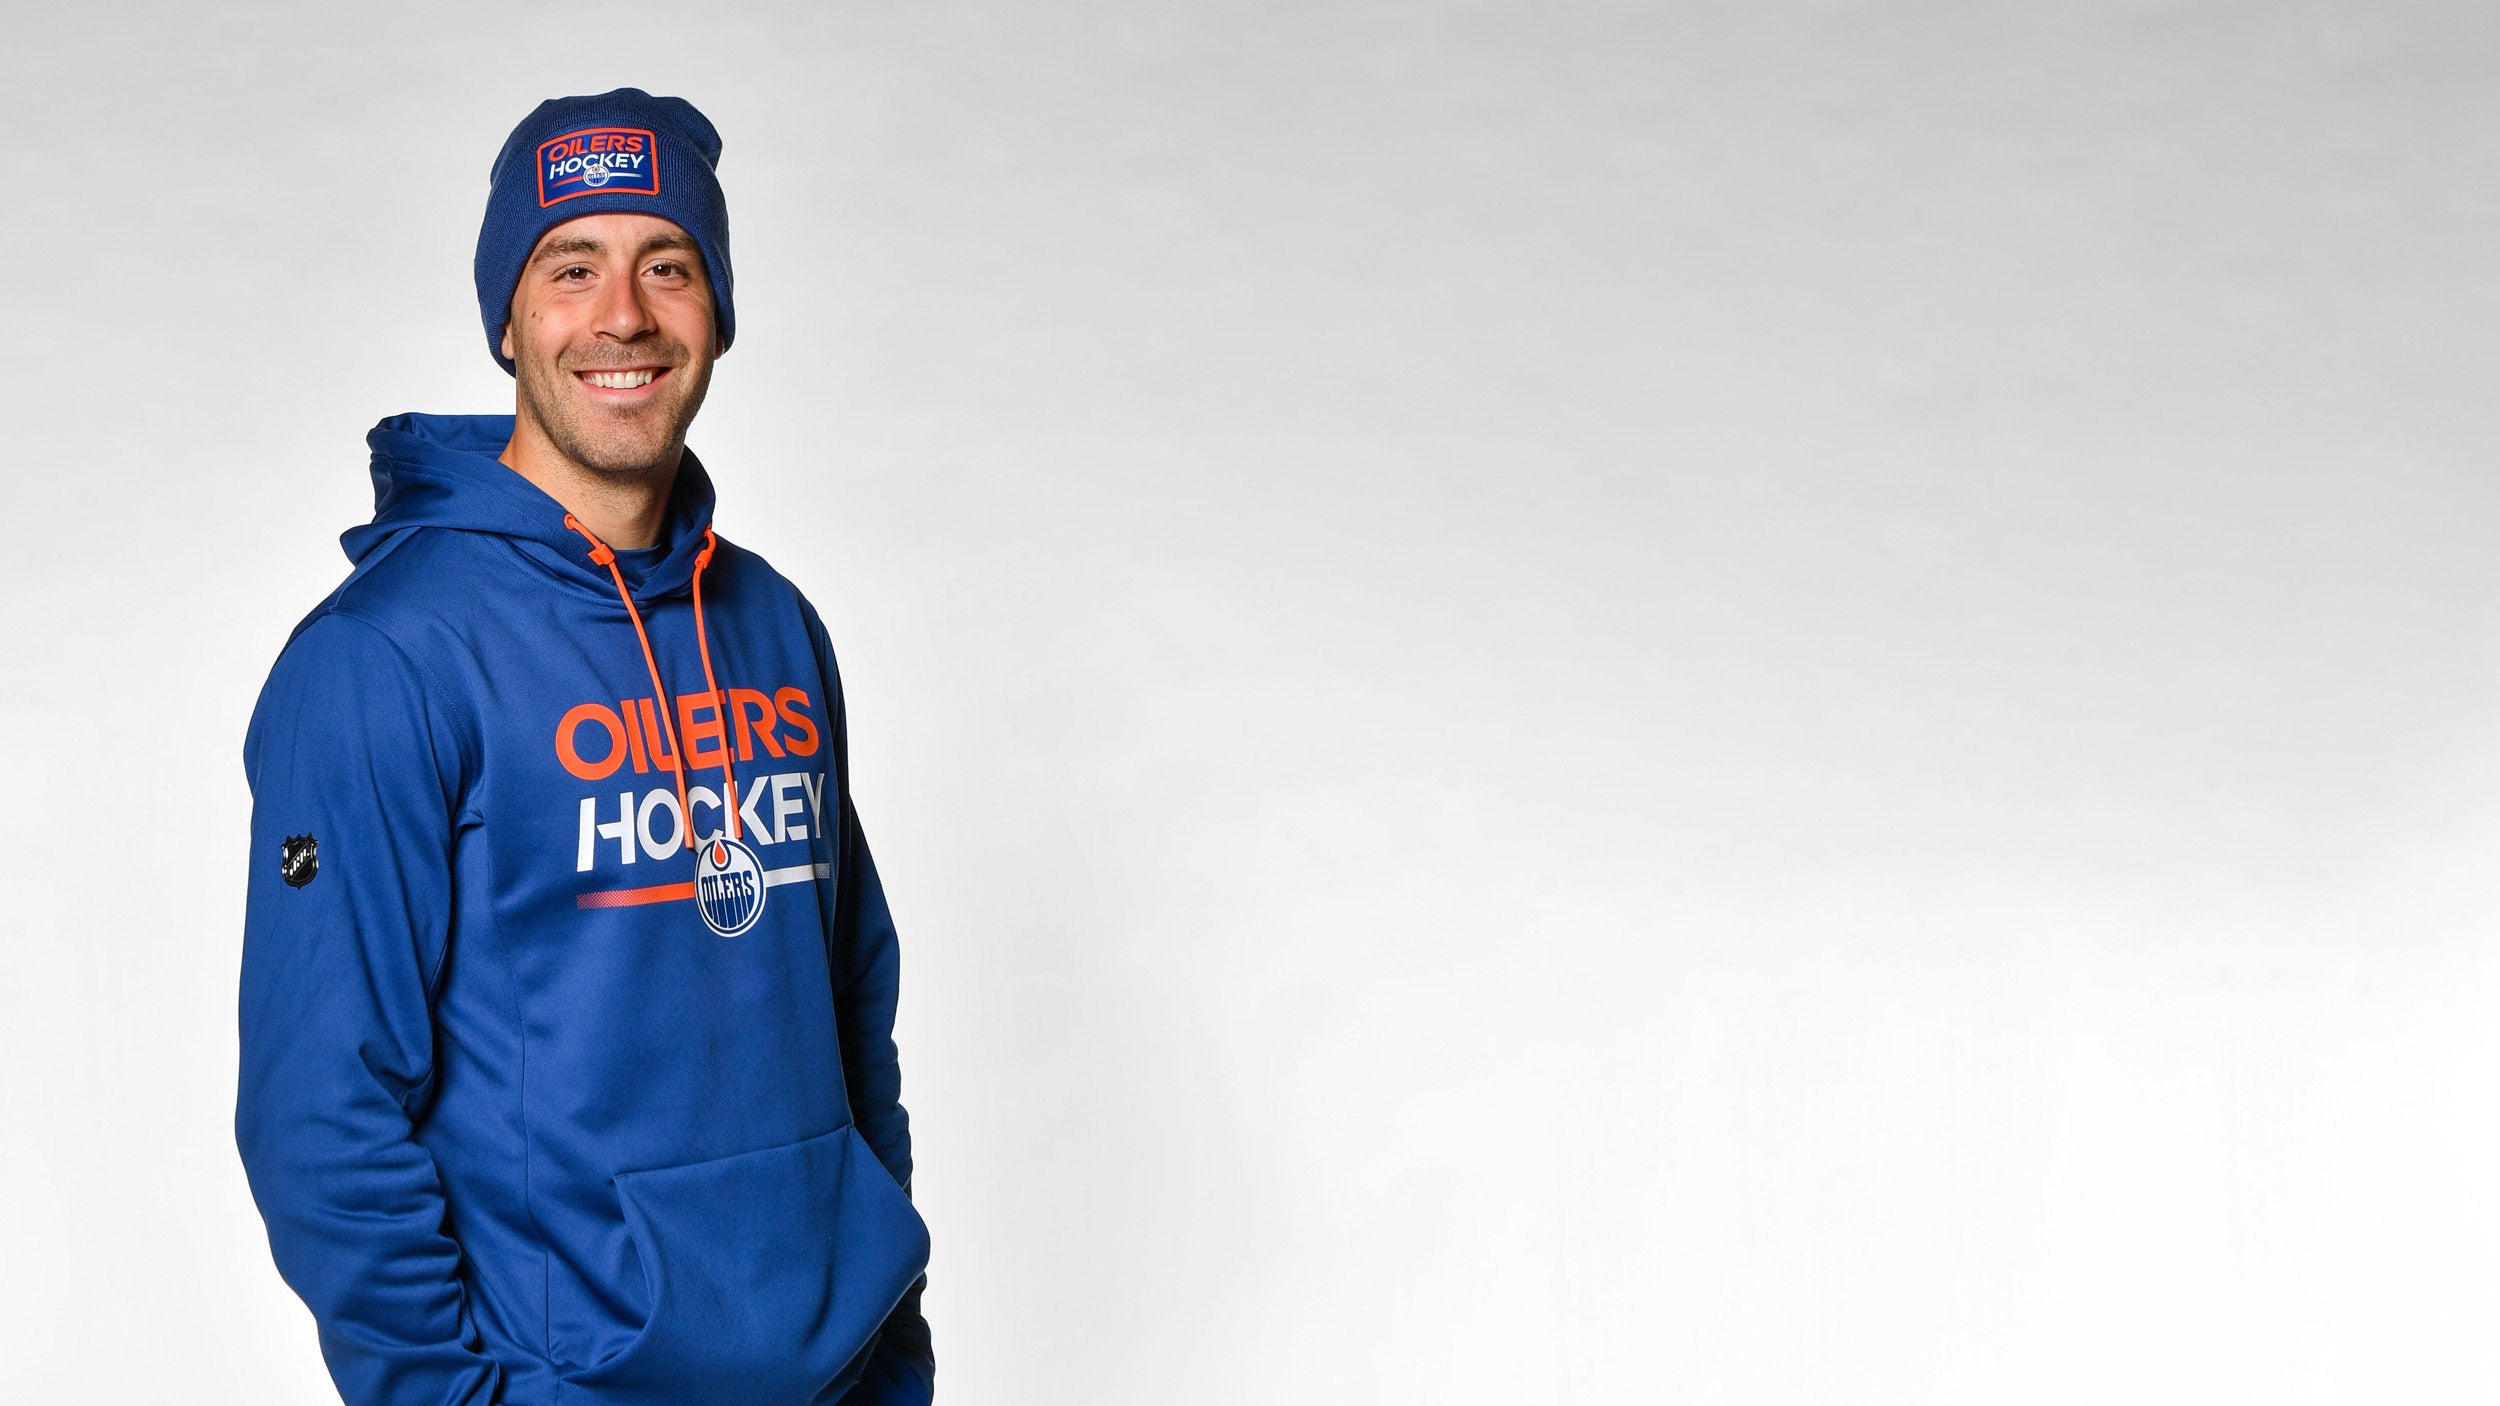 A massive new Oilers store has opened up in the ICE District